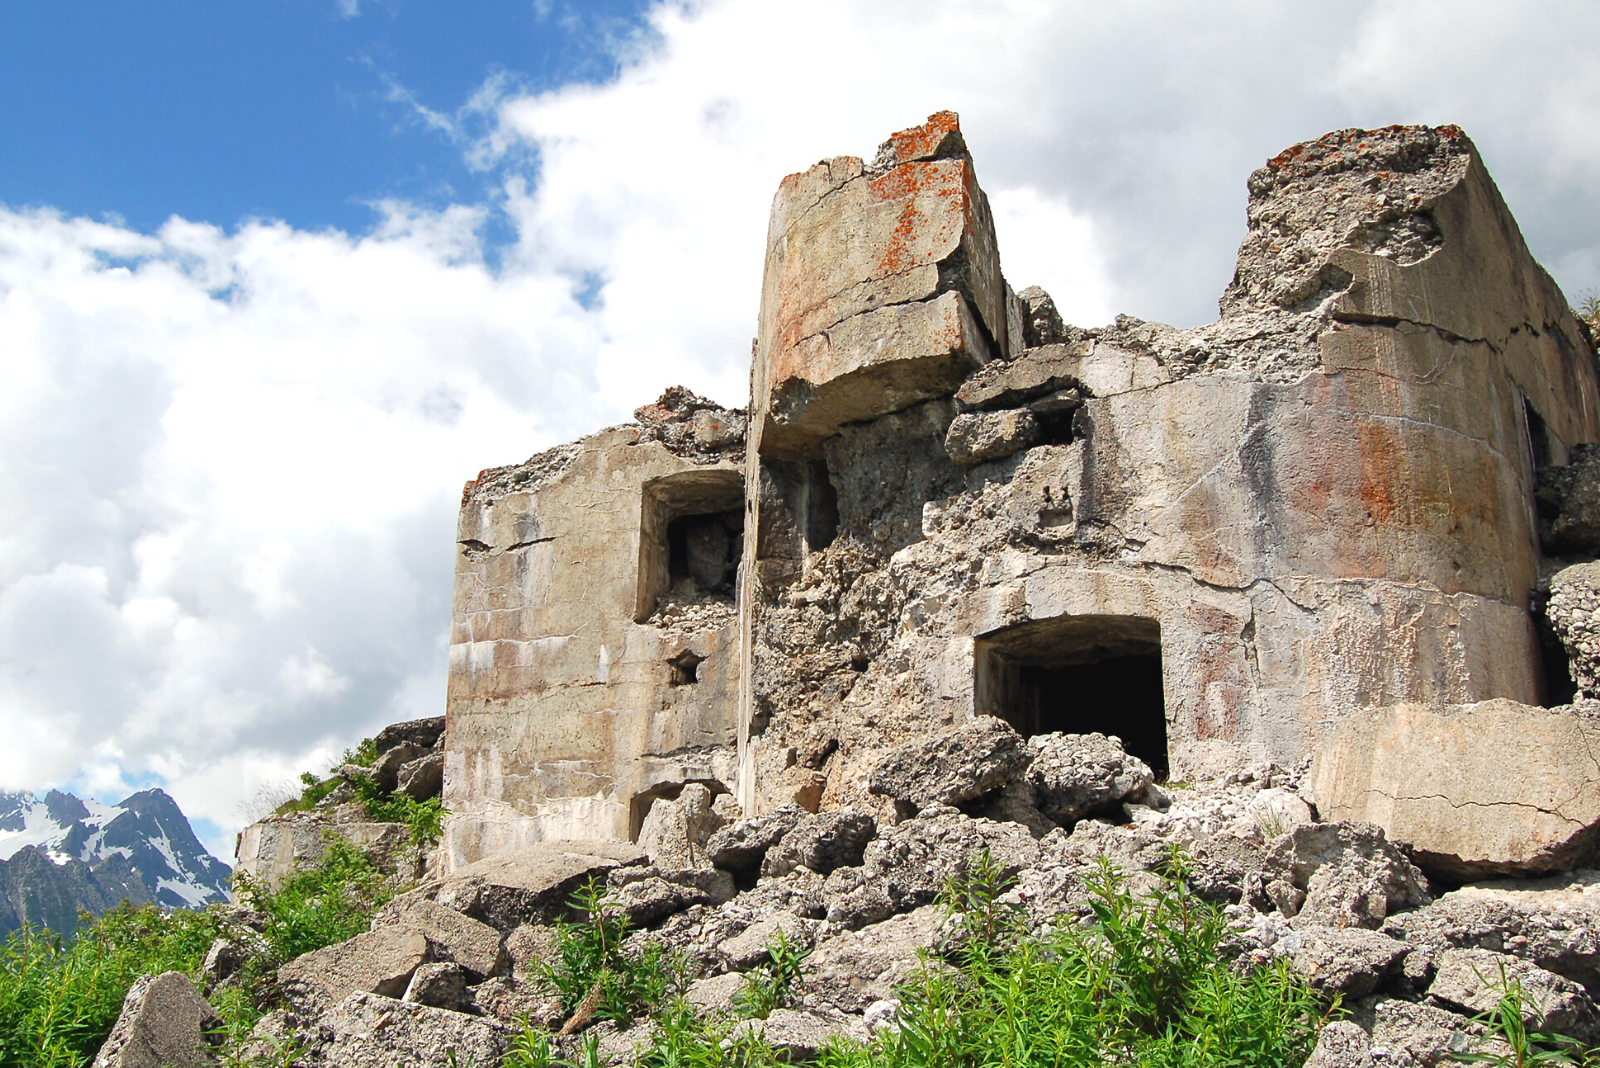 First World War ruins in the Dolomites